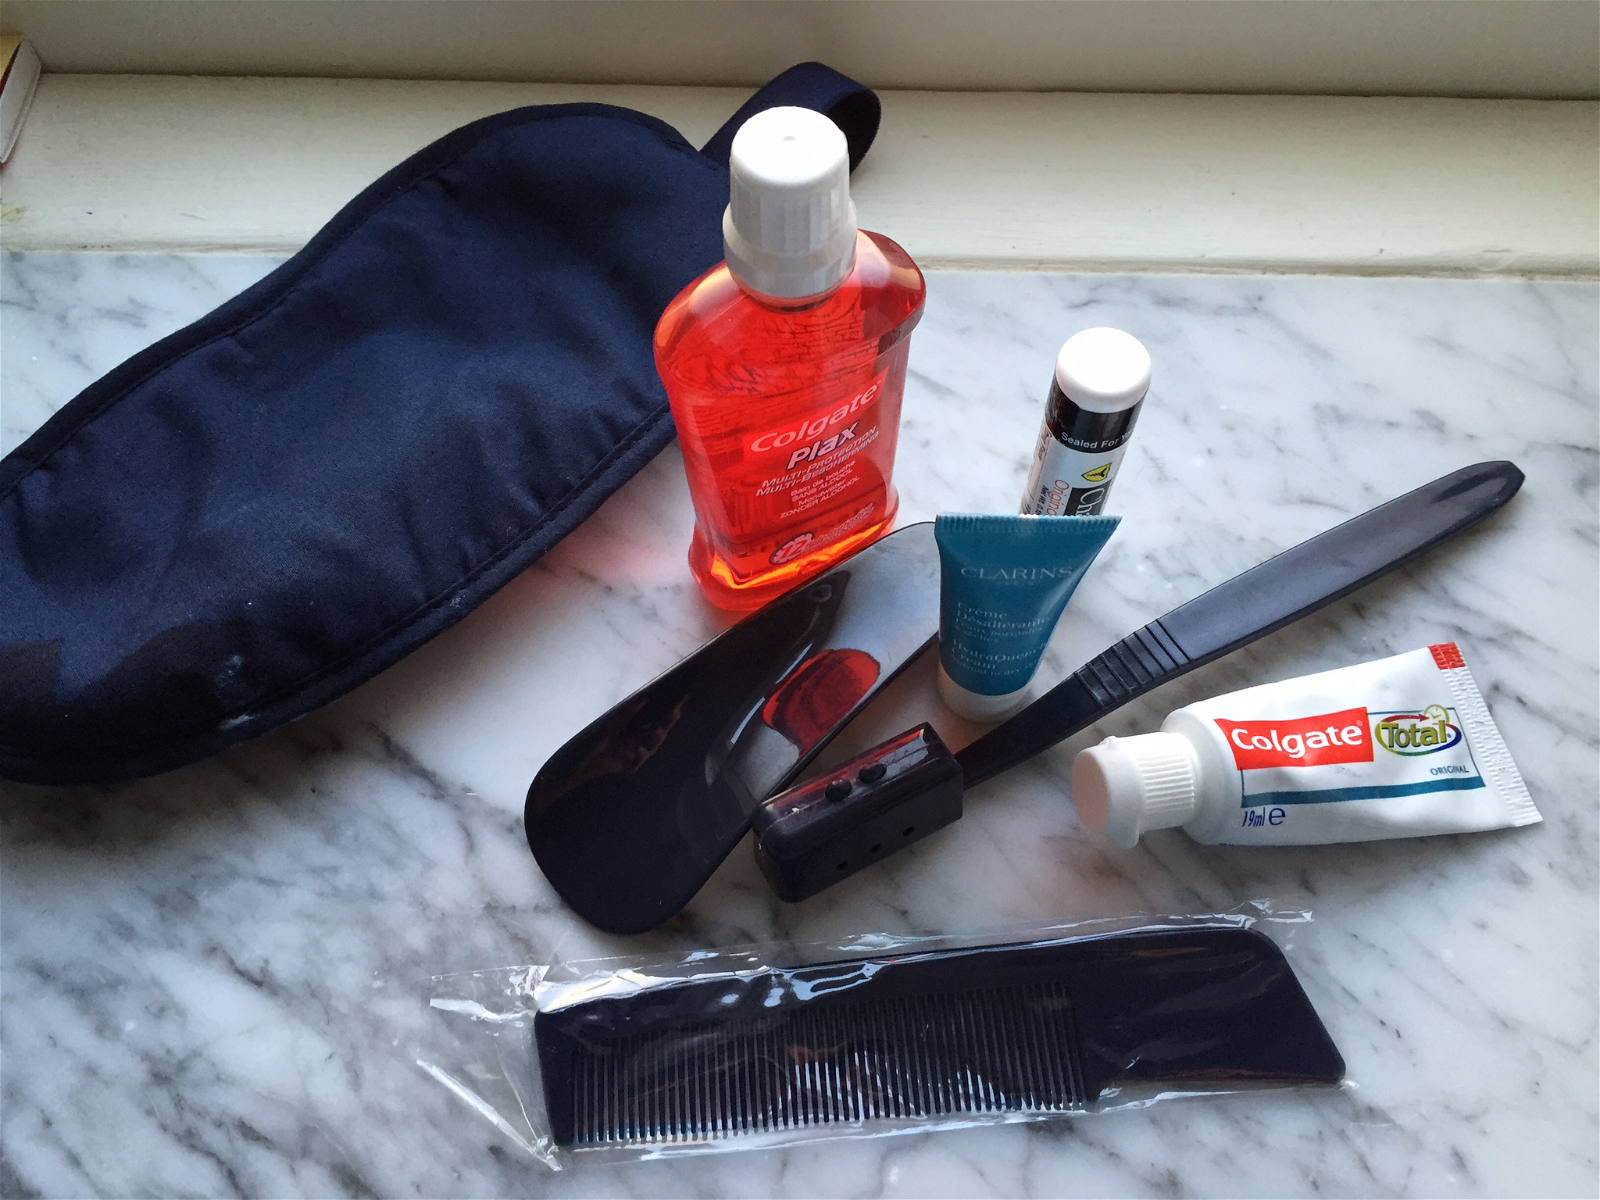 Air France business class amenity kit contents